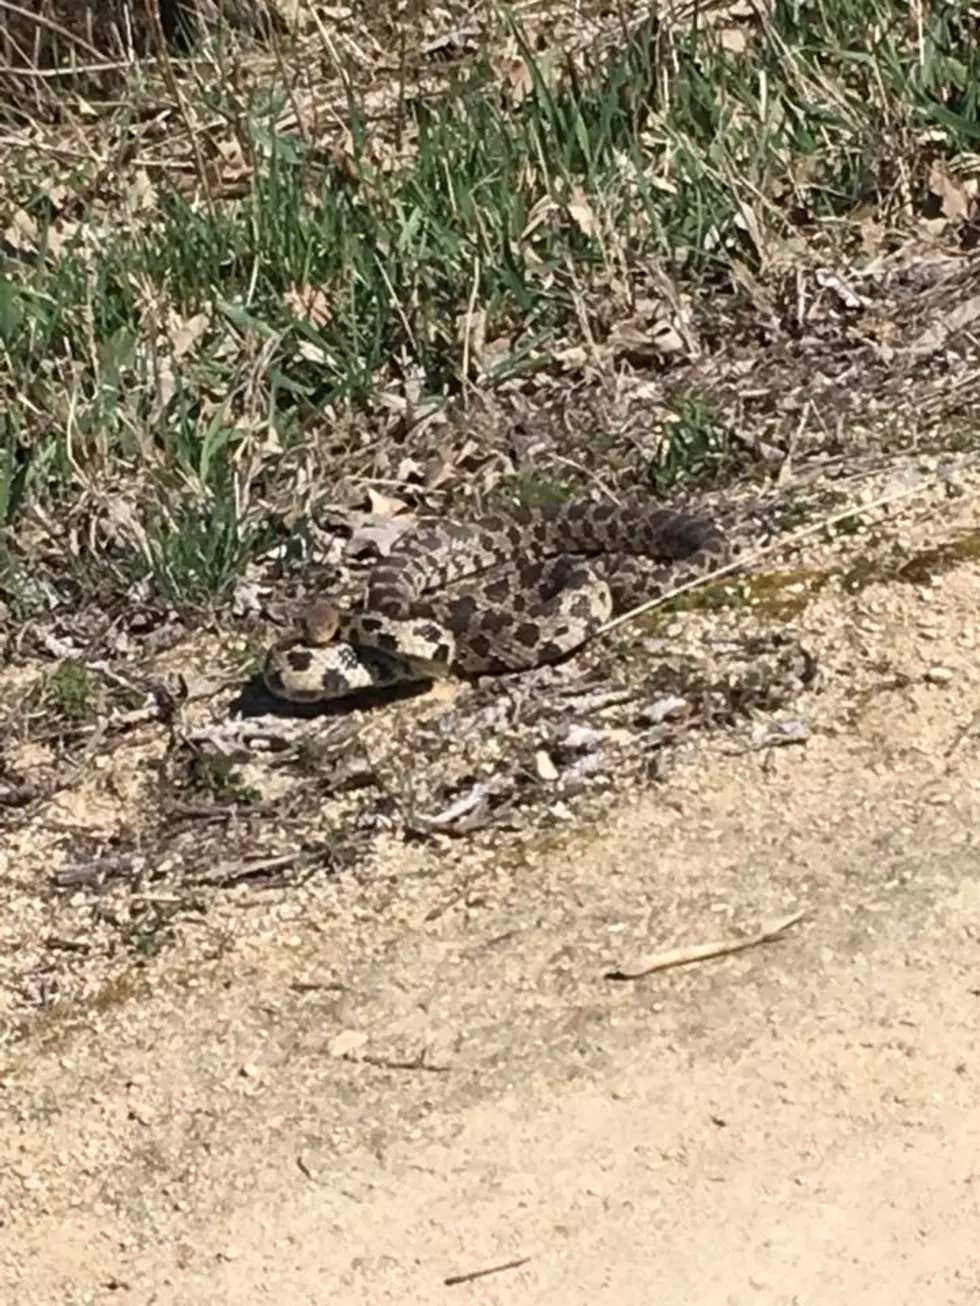 Was a Rattlesnake Spotted on Roscoe Trail Over the Weekend?